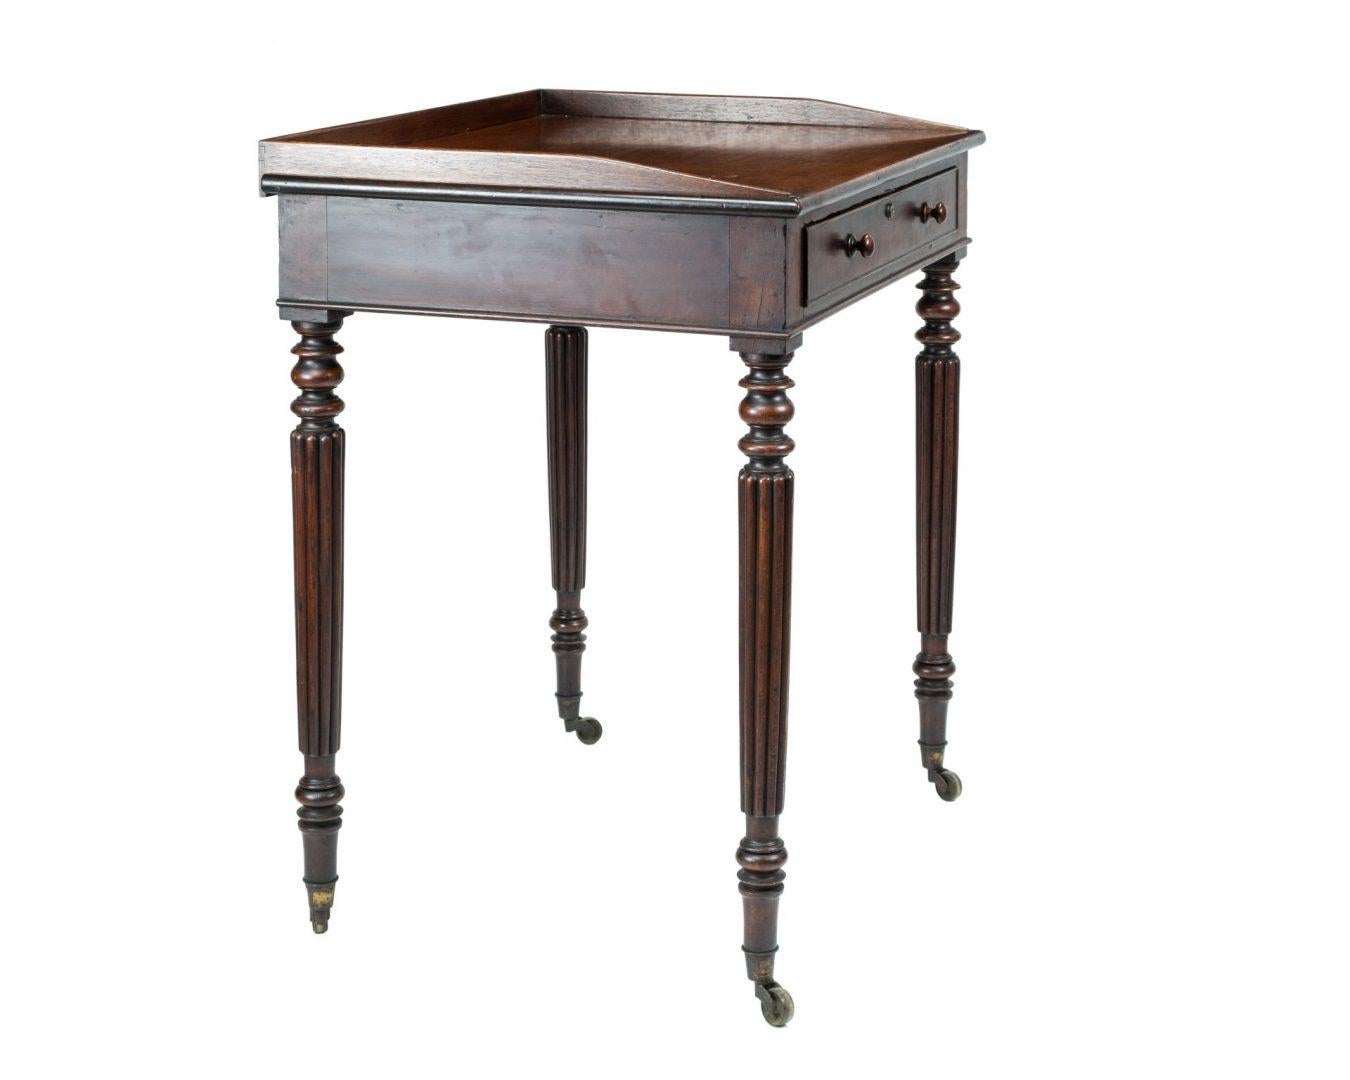 A Regency mahogany writing table attributed to Gillows, early 19th century, the rectangular back with raised border on three sides above a cock beaded frieze drawer with divisions and a lock stamped Bramah, 124 Piccadilly and raised on ring turned